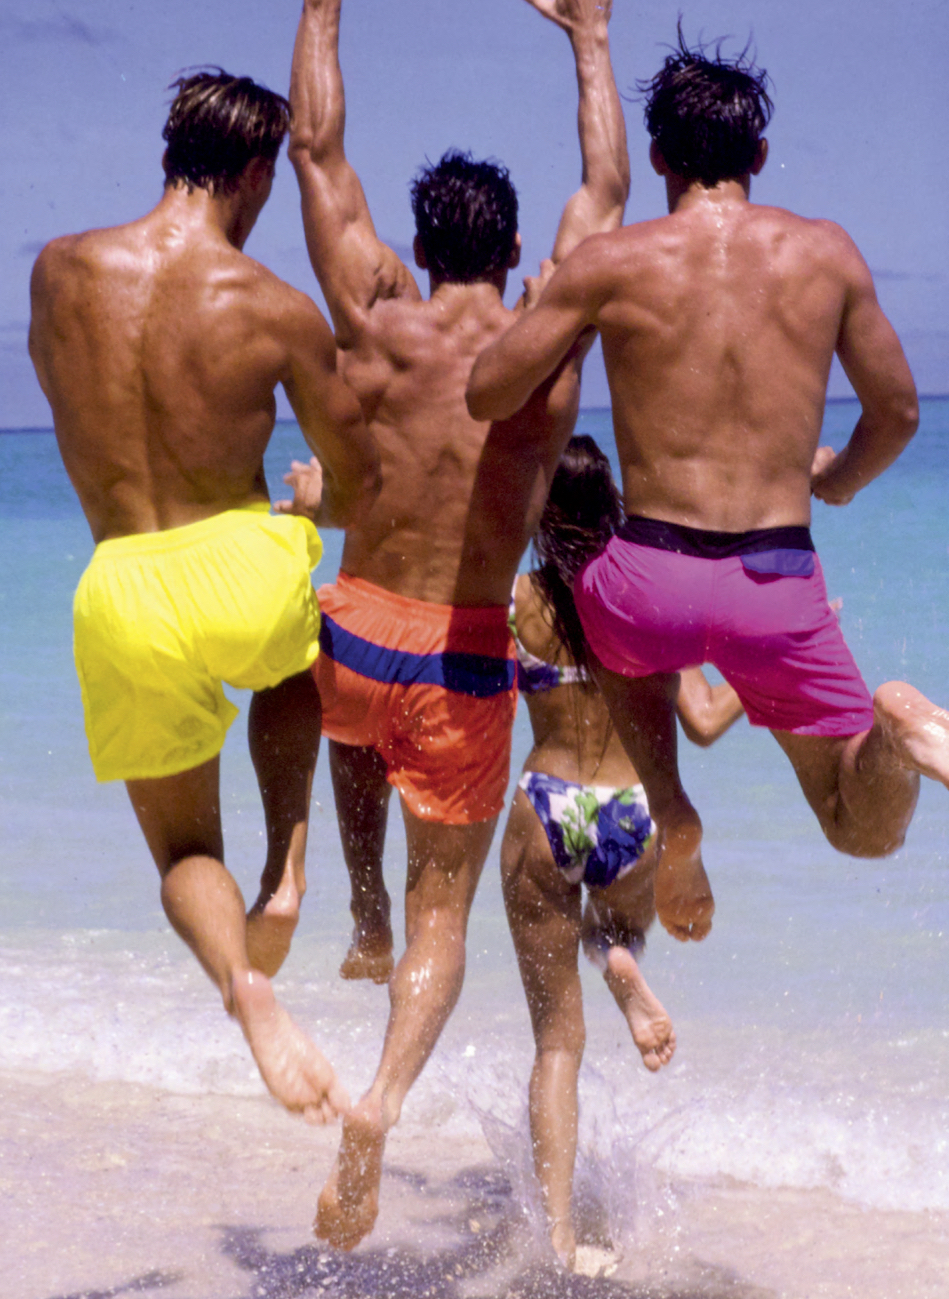 Jim Moore | Boys and Super-Girls | Oahu, Hawaii by Herb Ritts, 1989 | 4